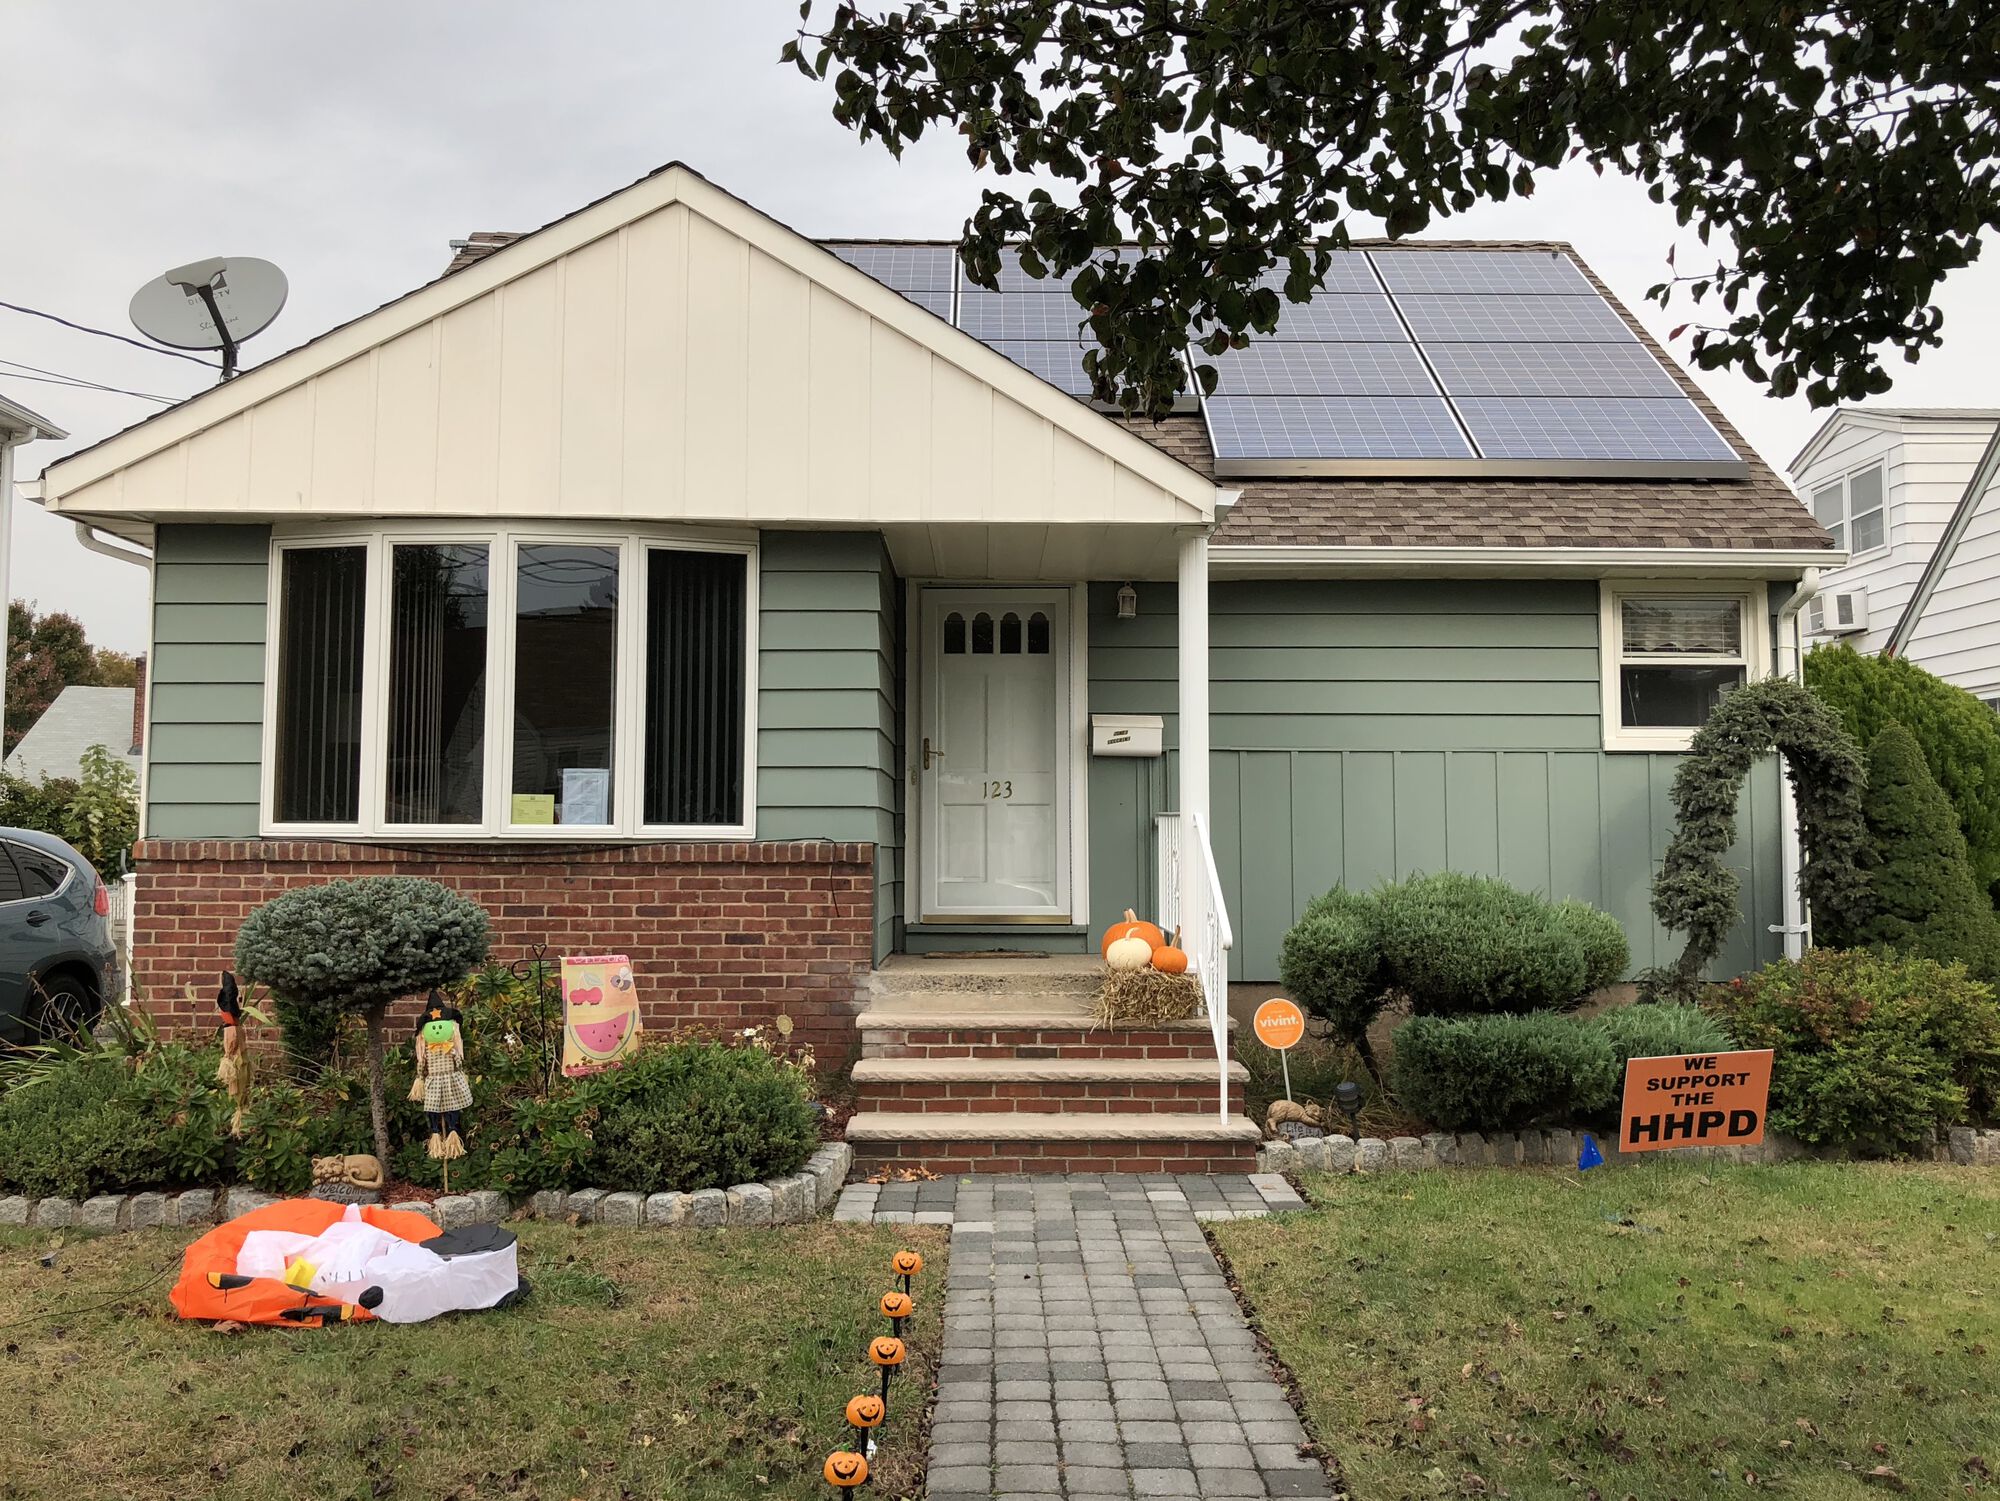 Add-a-Level Addition with Alside Siding, GAF Roofing, Andersen Windows, Boral Stone Front _ Steps, Timbertech Deck in Hasbrouck Heights, Bergen County NJ